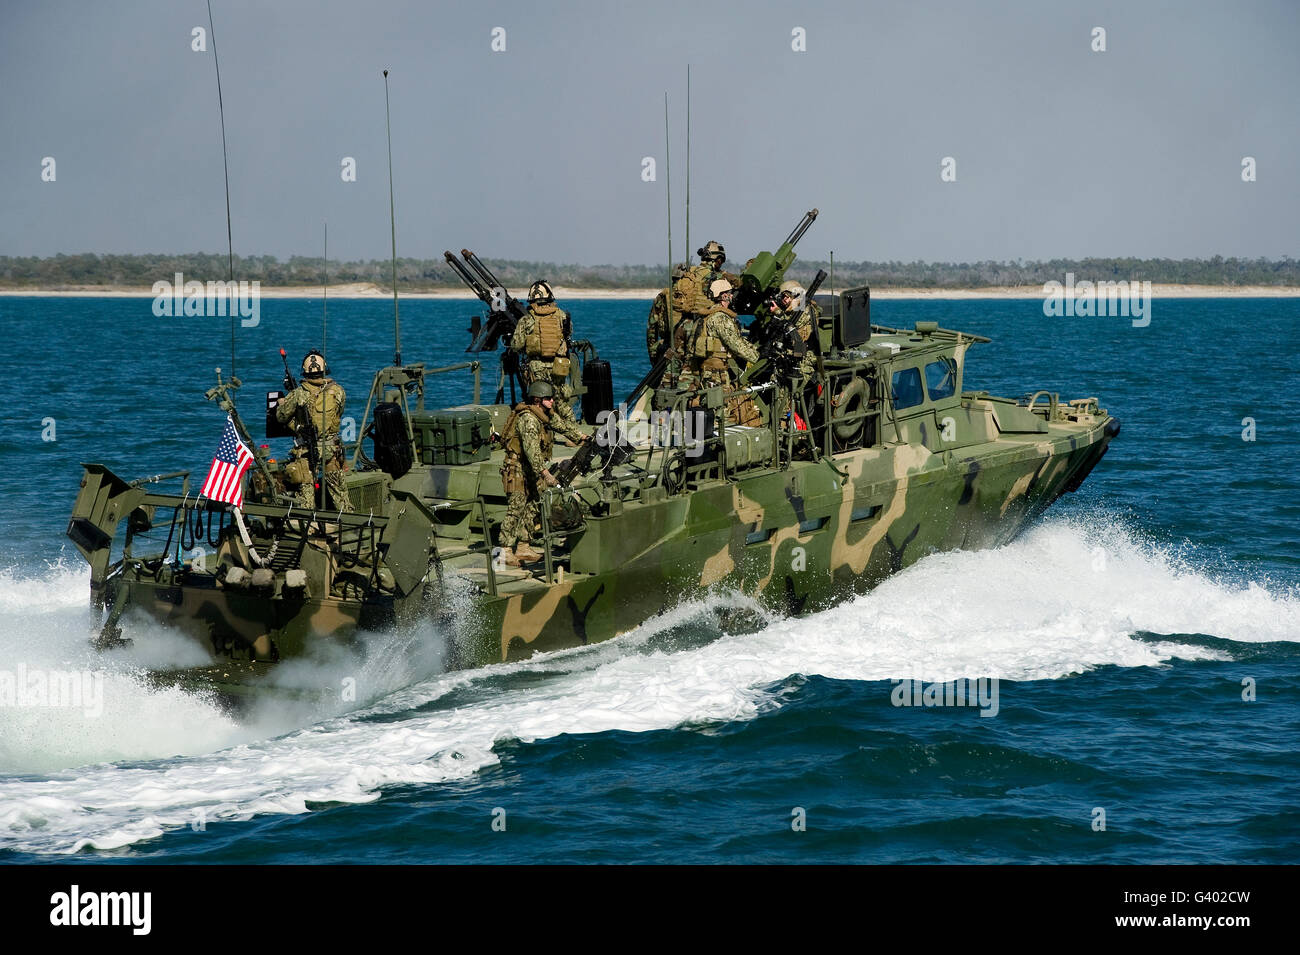 A Riverine Command Boat conducts a route reconnaissance mission. Stock Photo